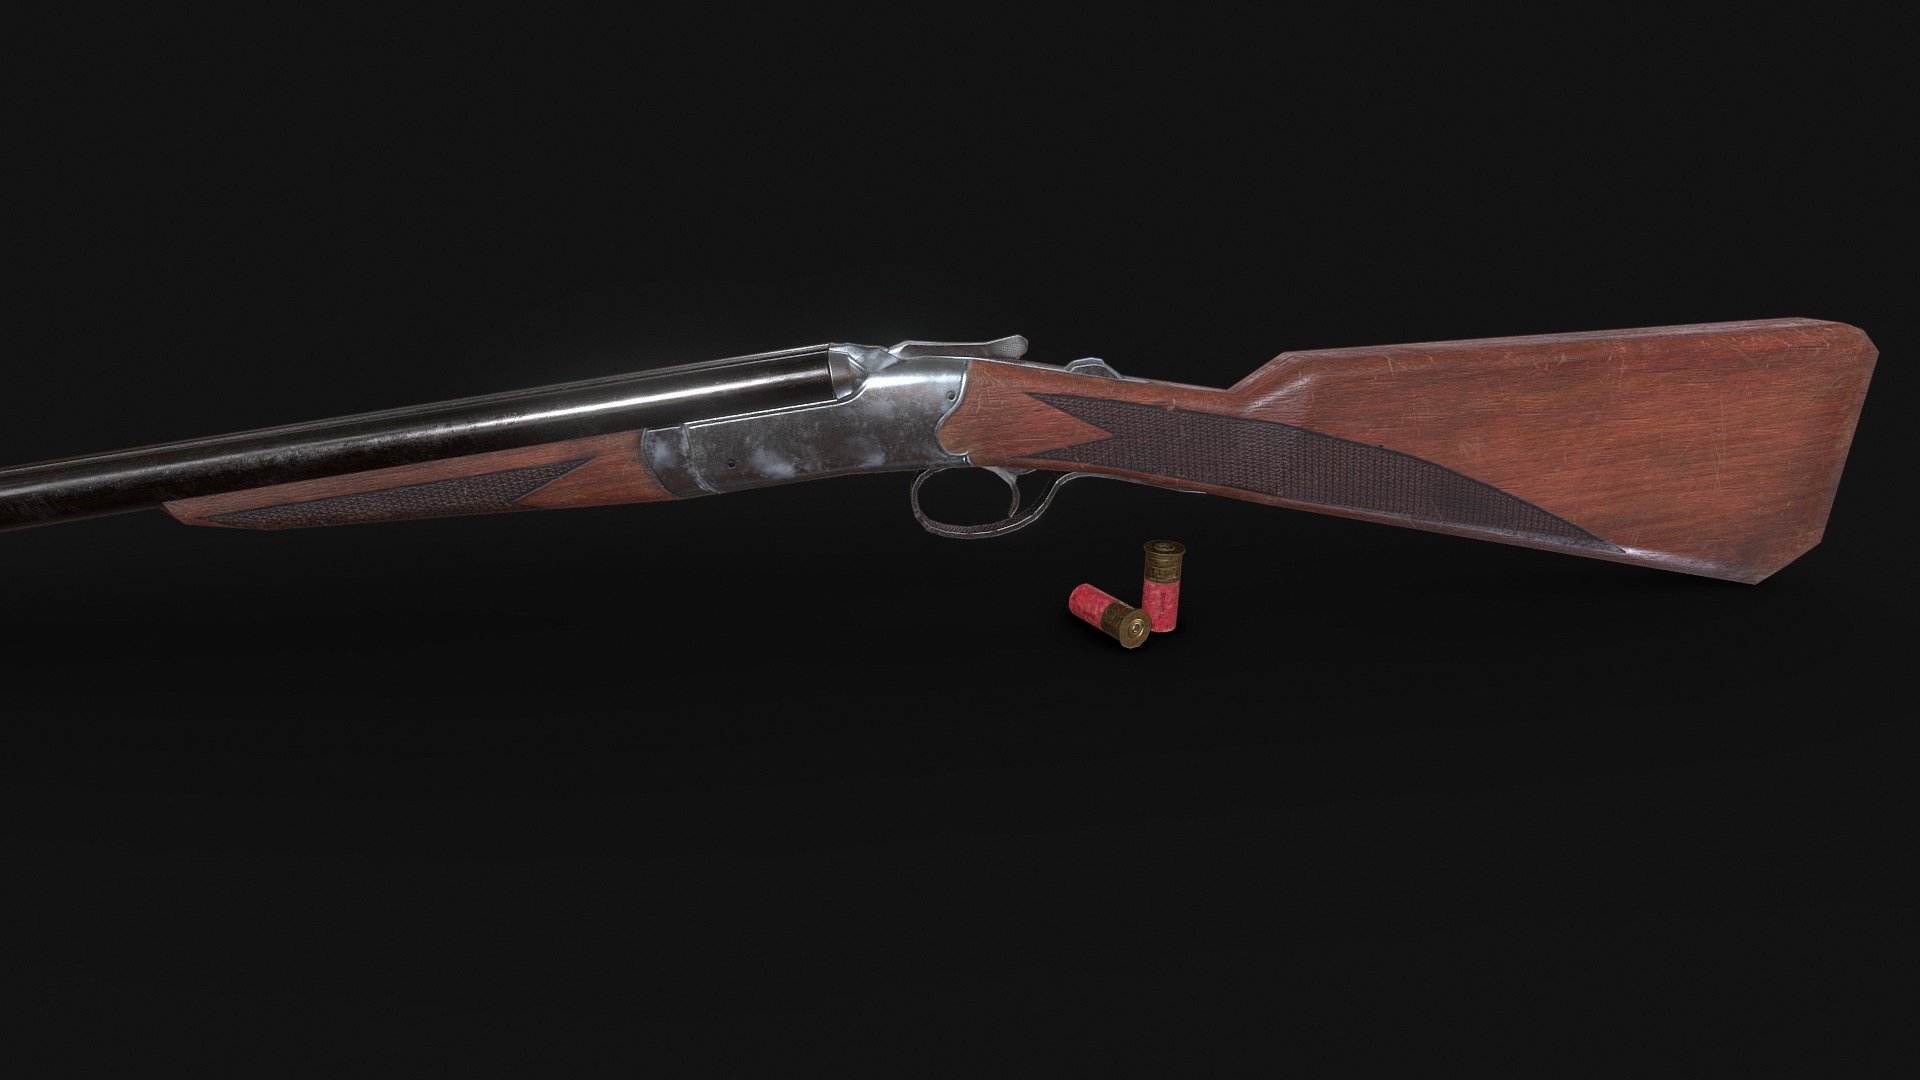 Low poly double barrel shotgun game asset.

Modeled in Maya, baked and textured in Substance Painter 3d model